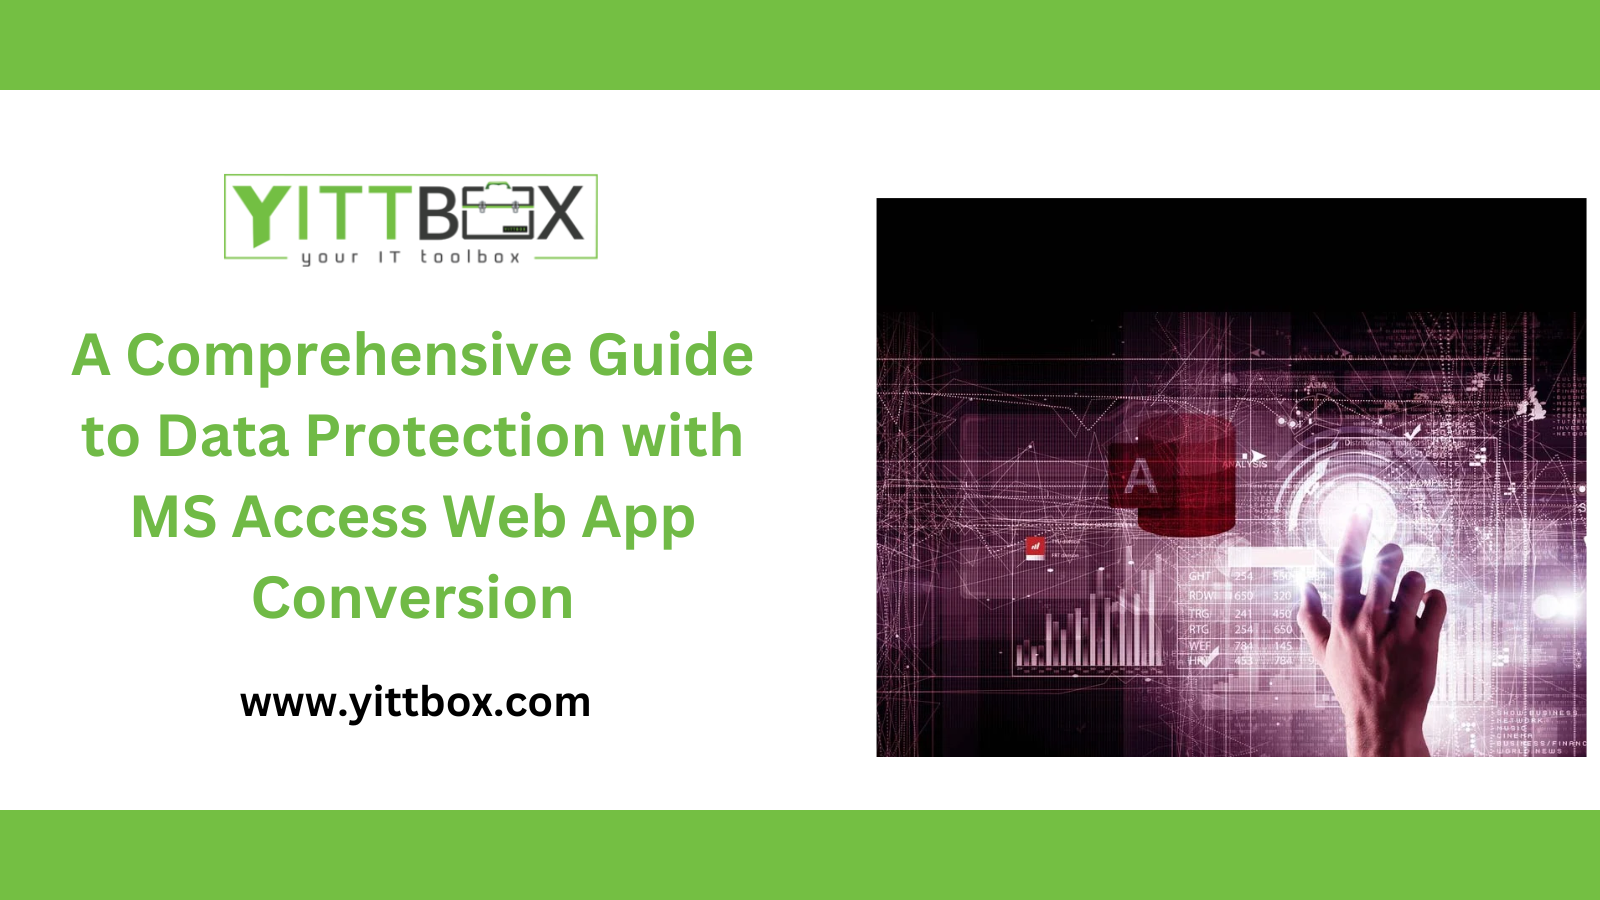 Securing the Cloud: A Comprehensive Guide to Data Protection with MS Access Web App Conversion